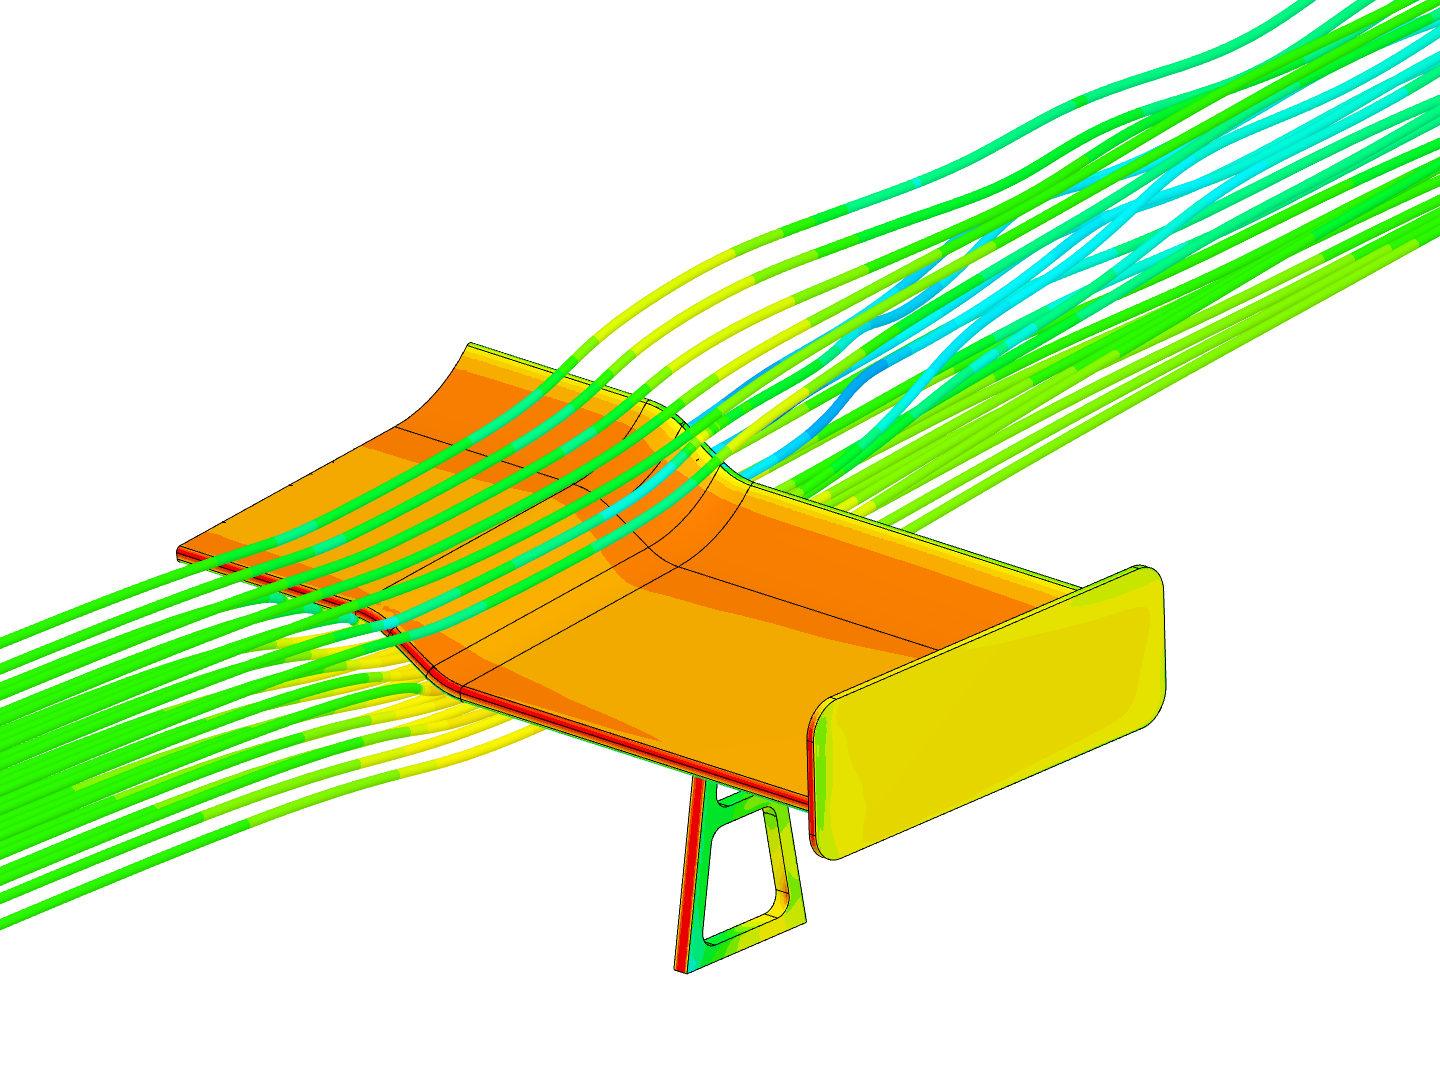 Airflow around a GT Car spoiler coursera project image